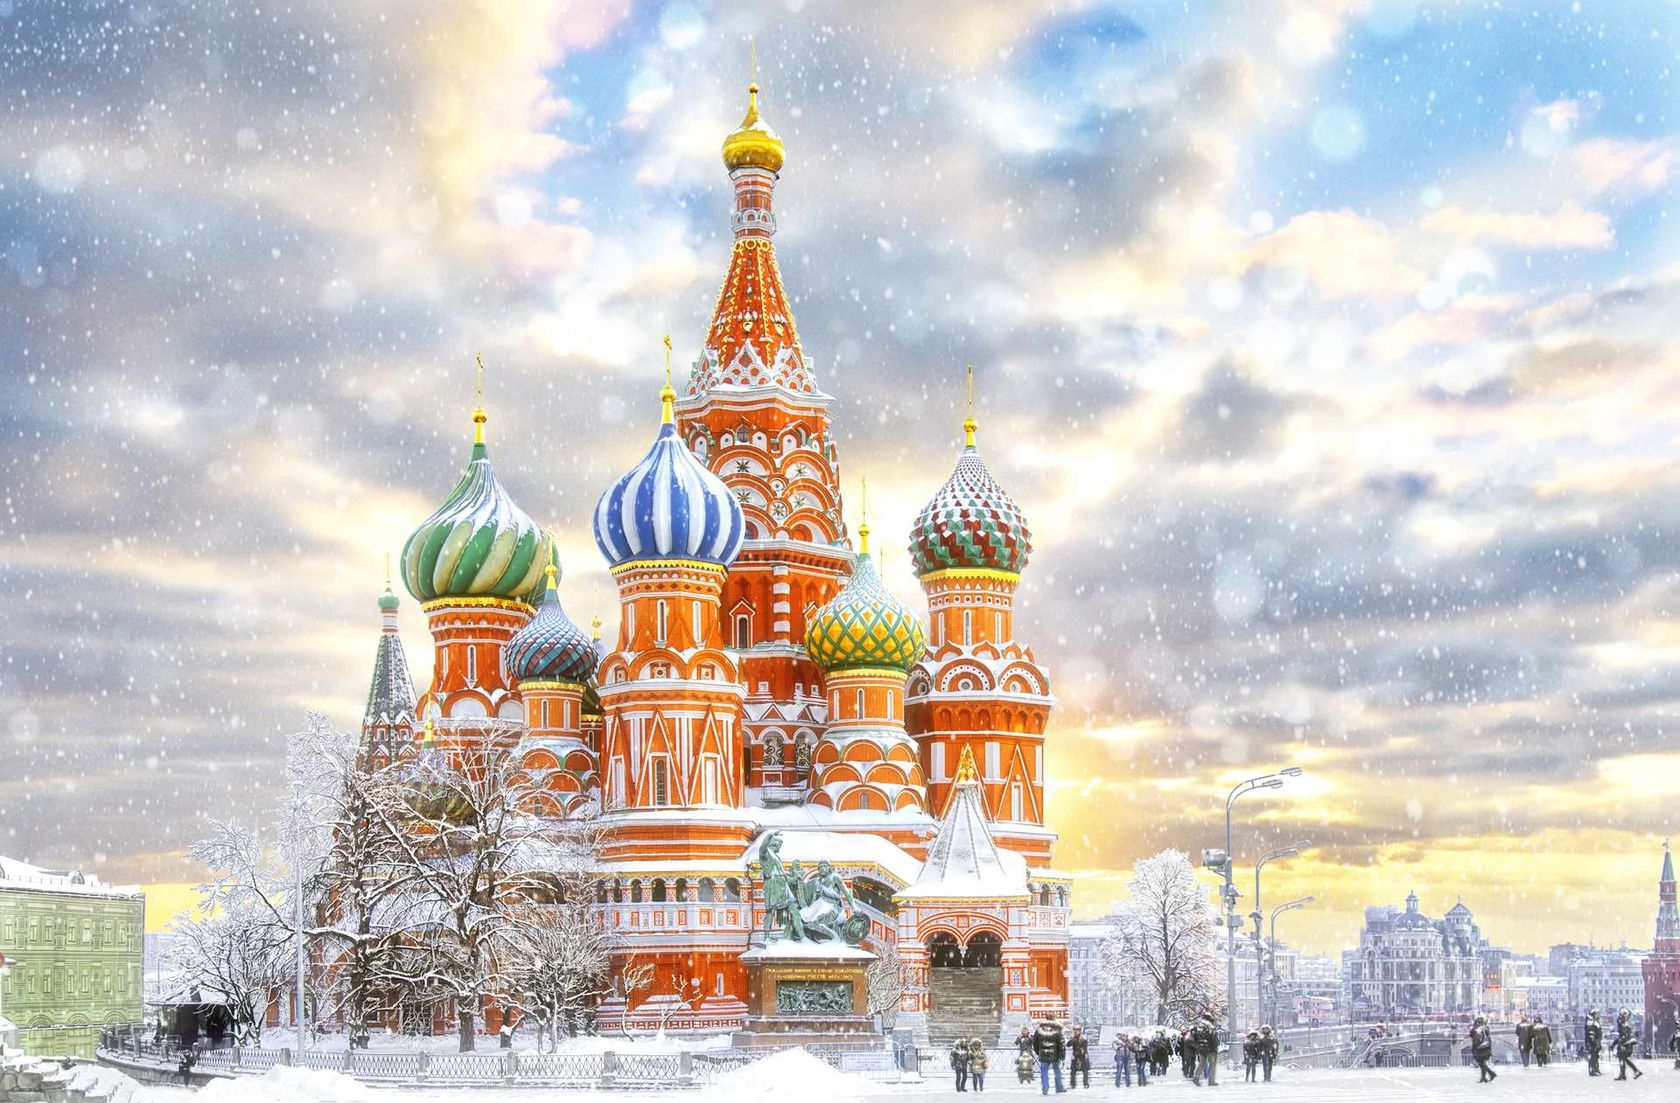 Rusland Moskou St. Basil s Cathedral on Red Square1